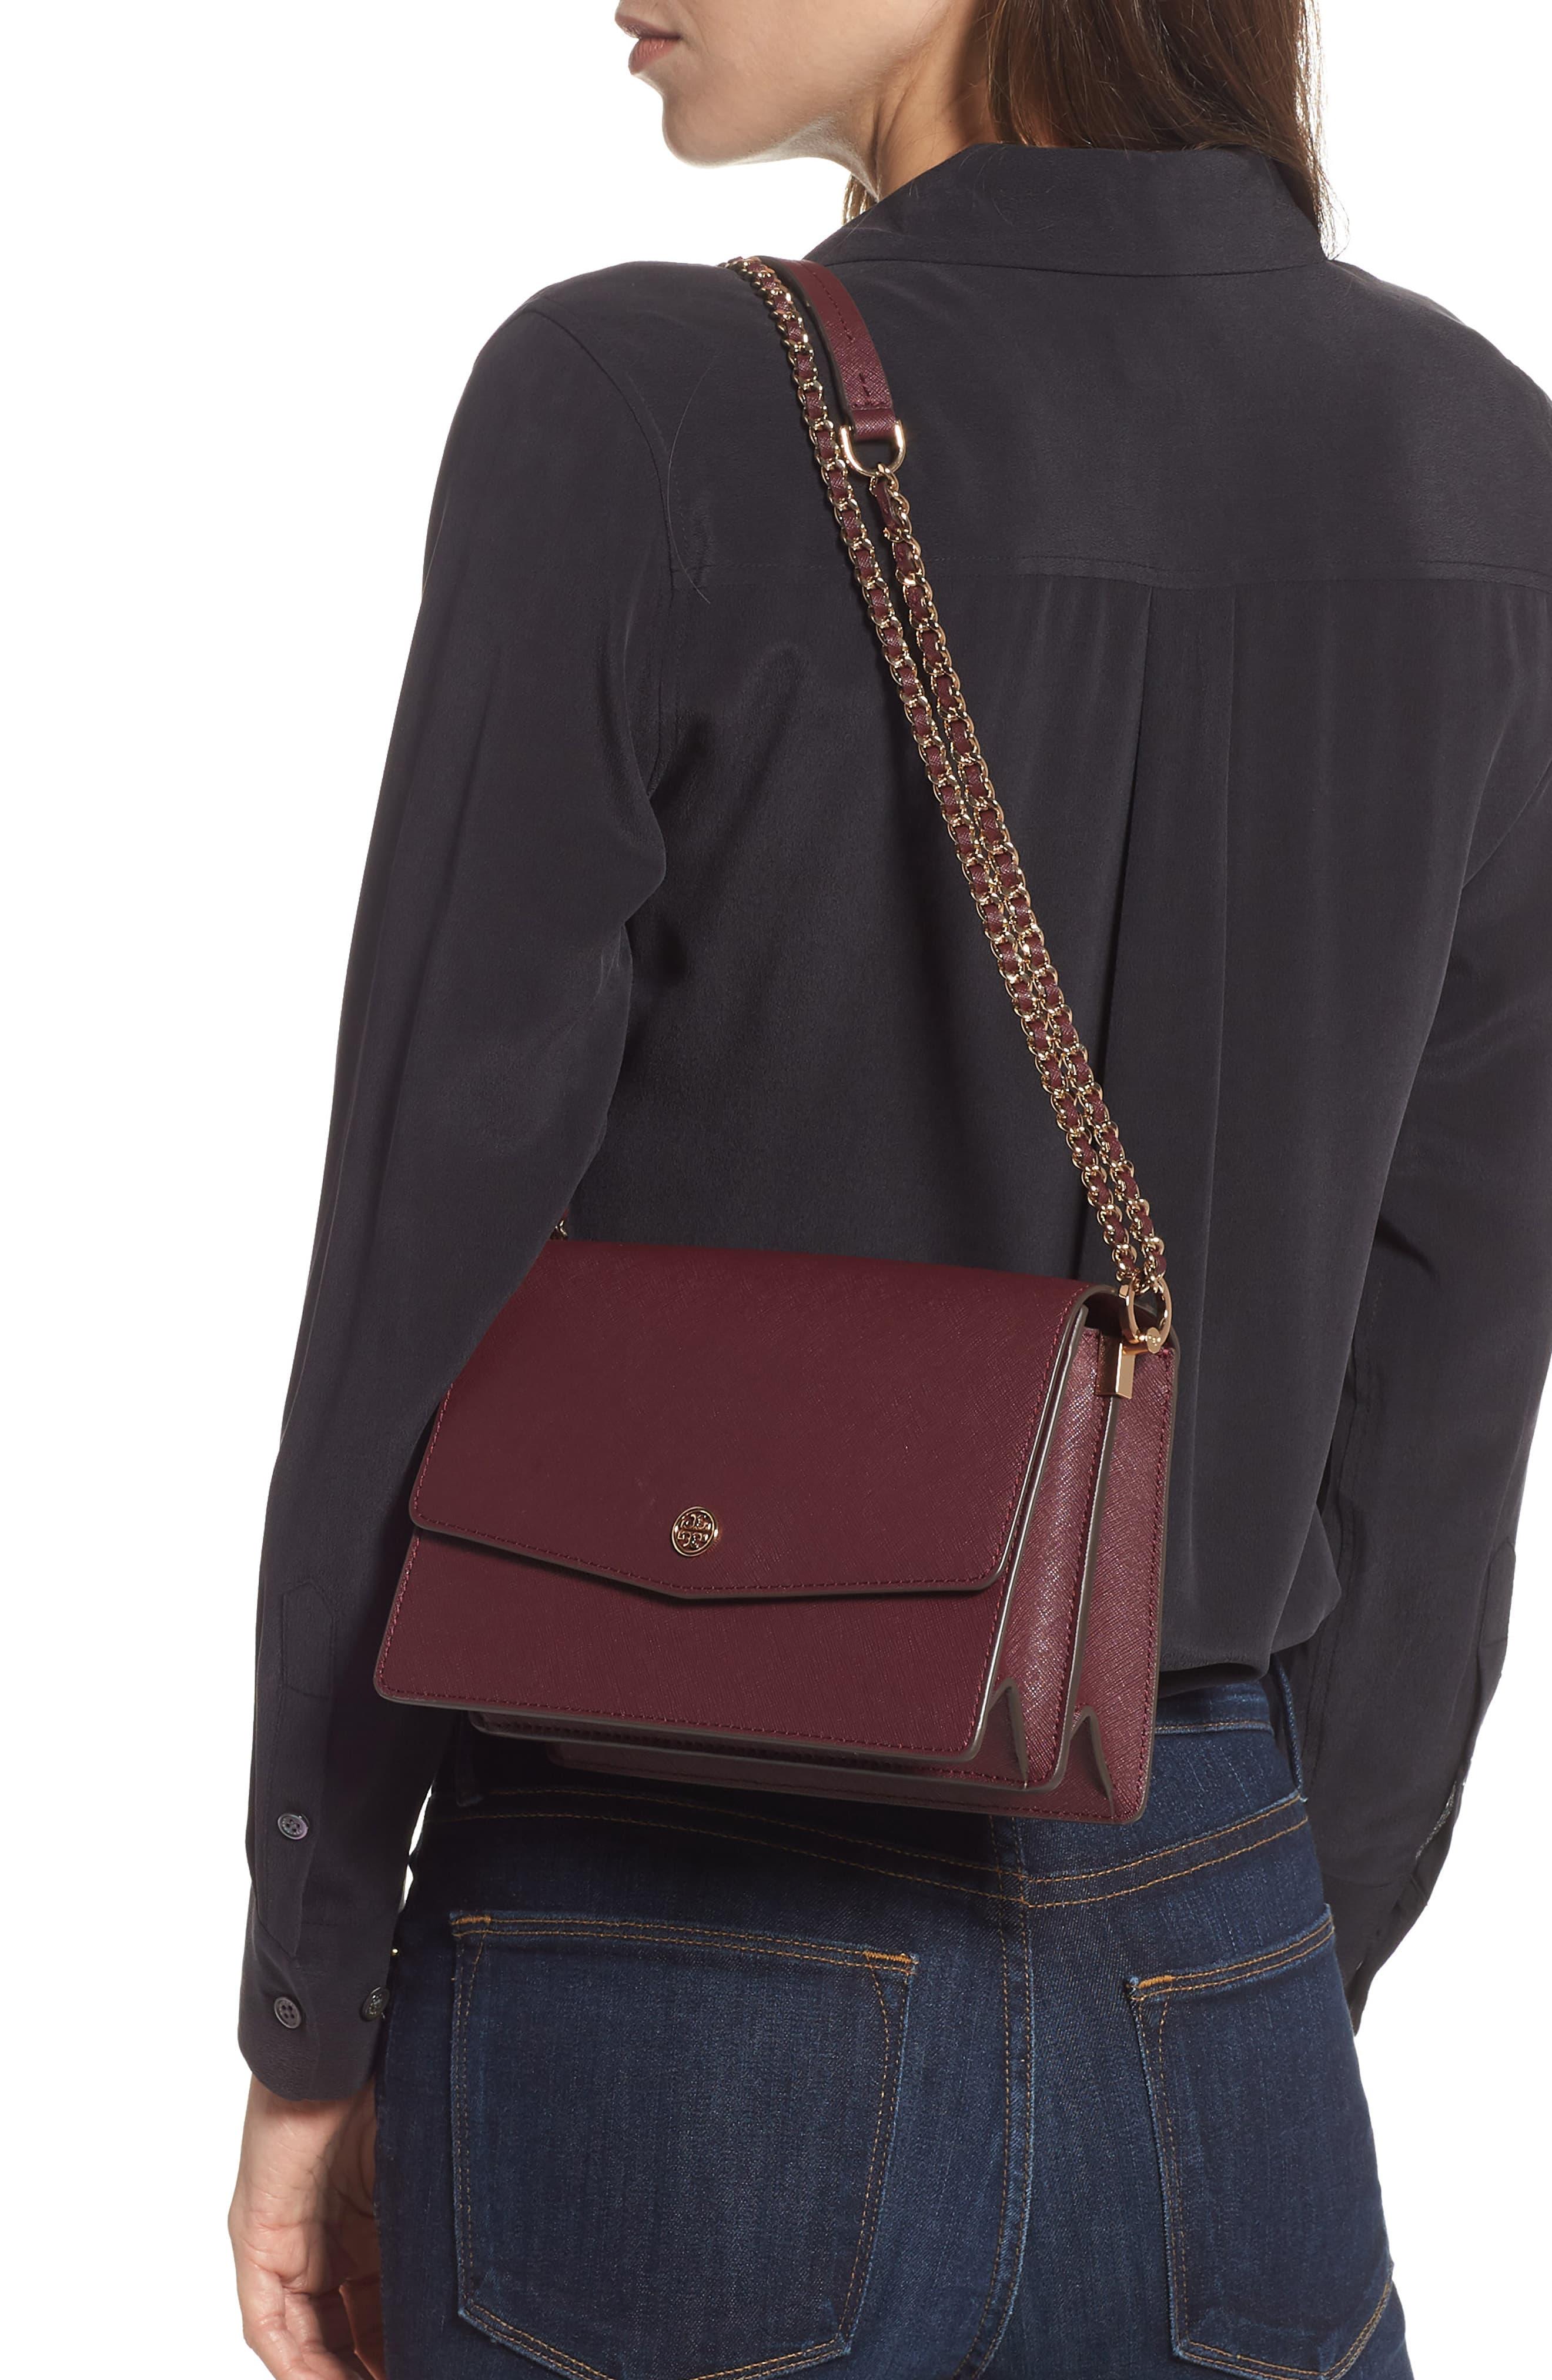 Tory Burch Robinson Leather Convertible Shoulder Bag in Burgundy (Black